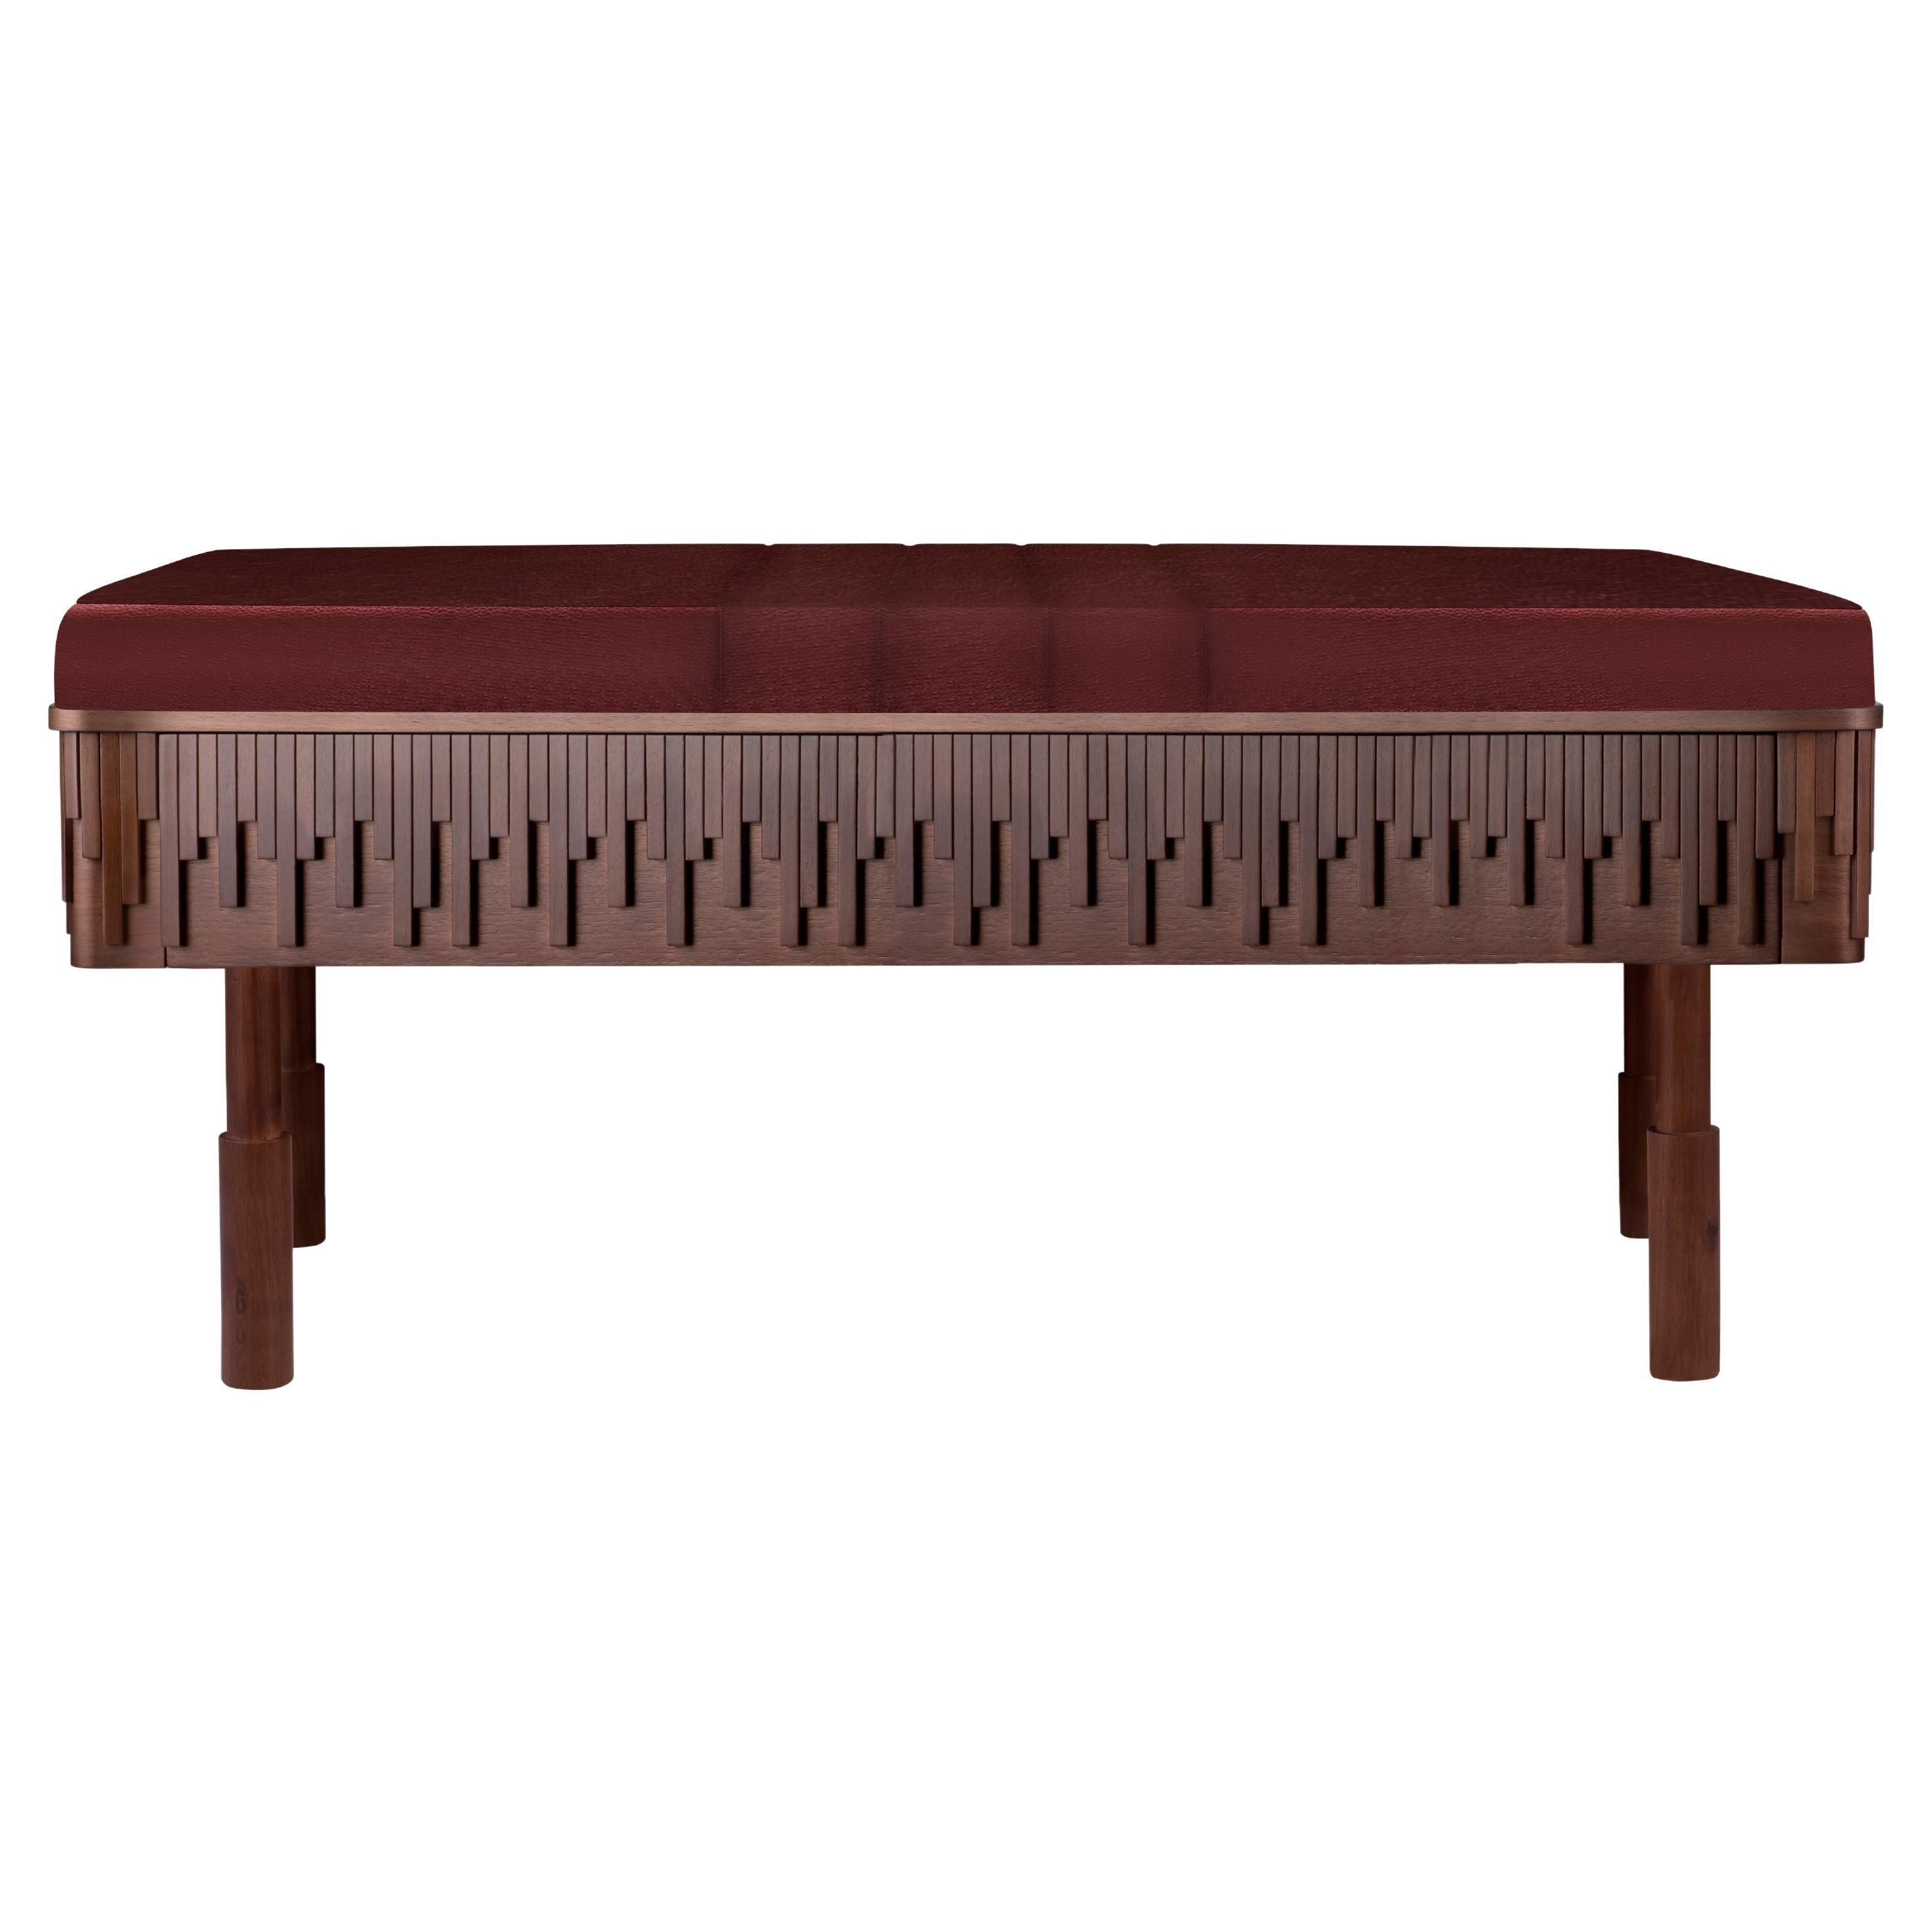 21st Campbell Bench Walnut Wood Leather